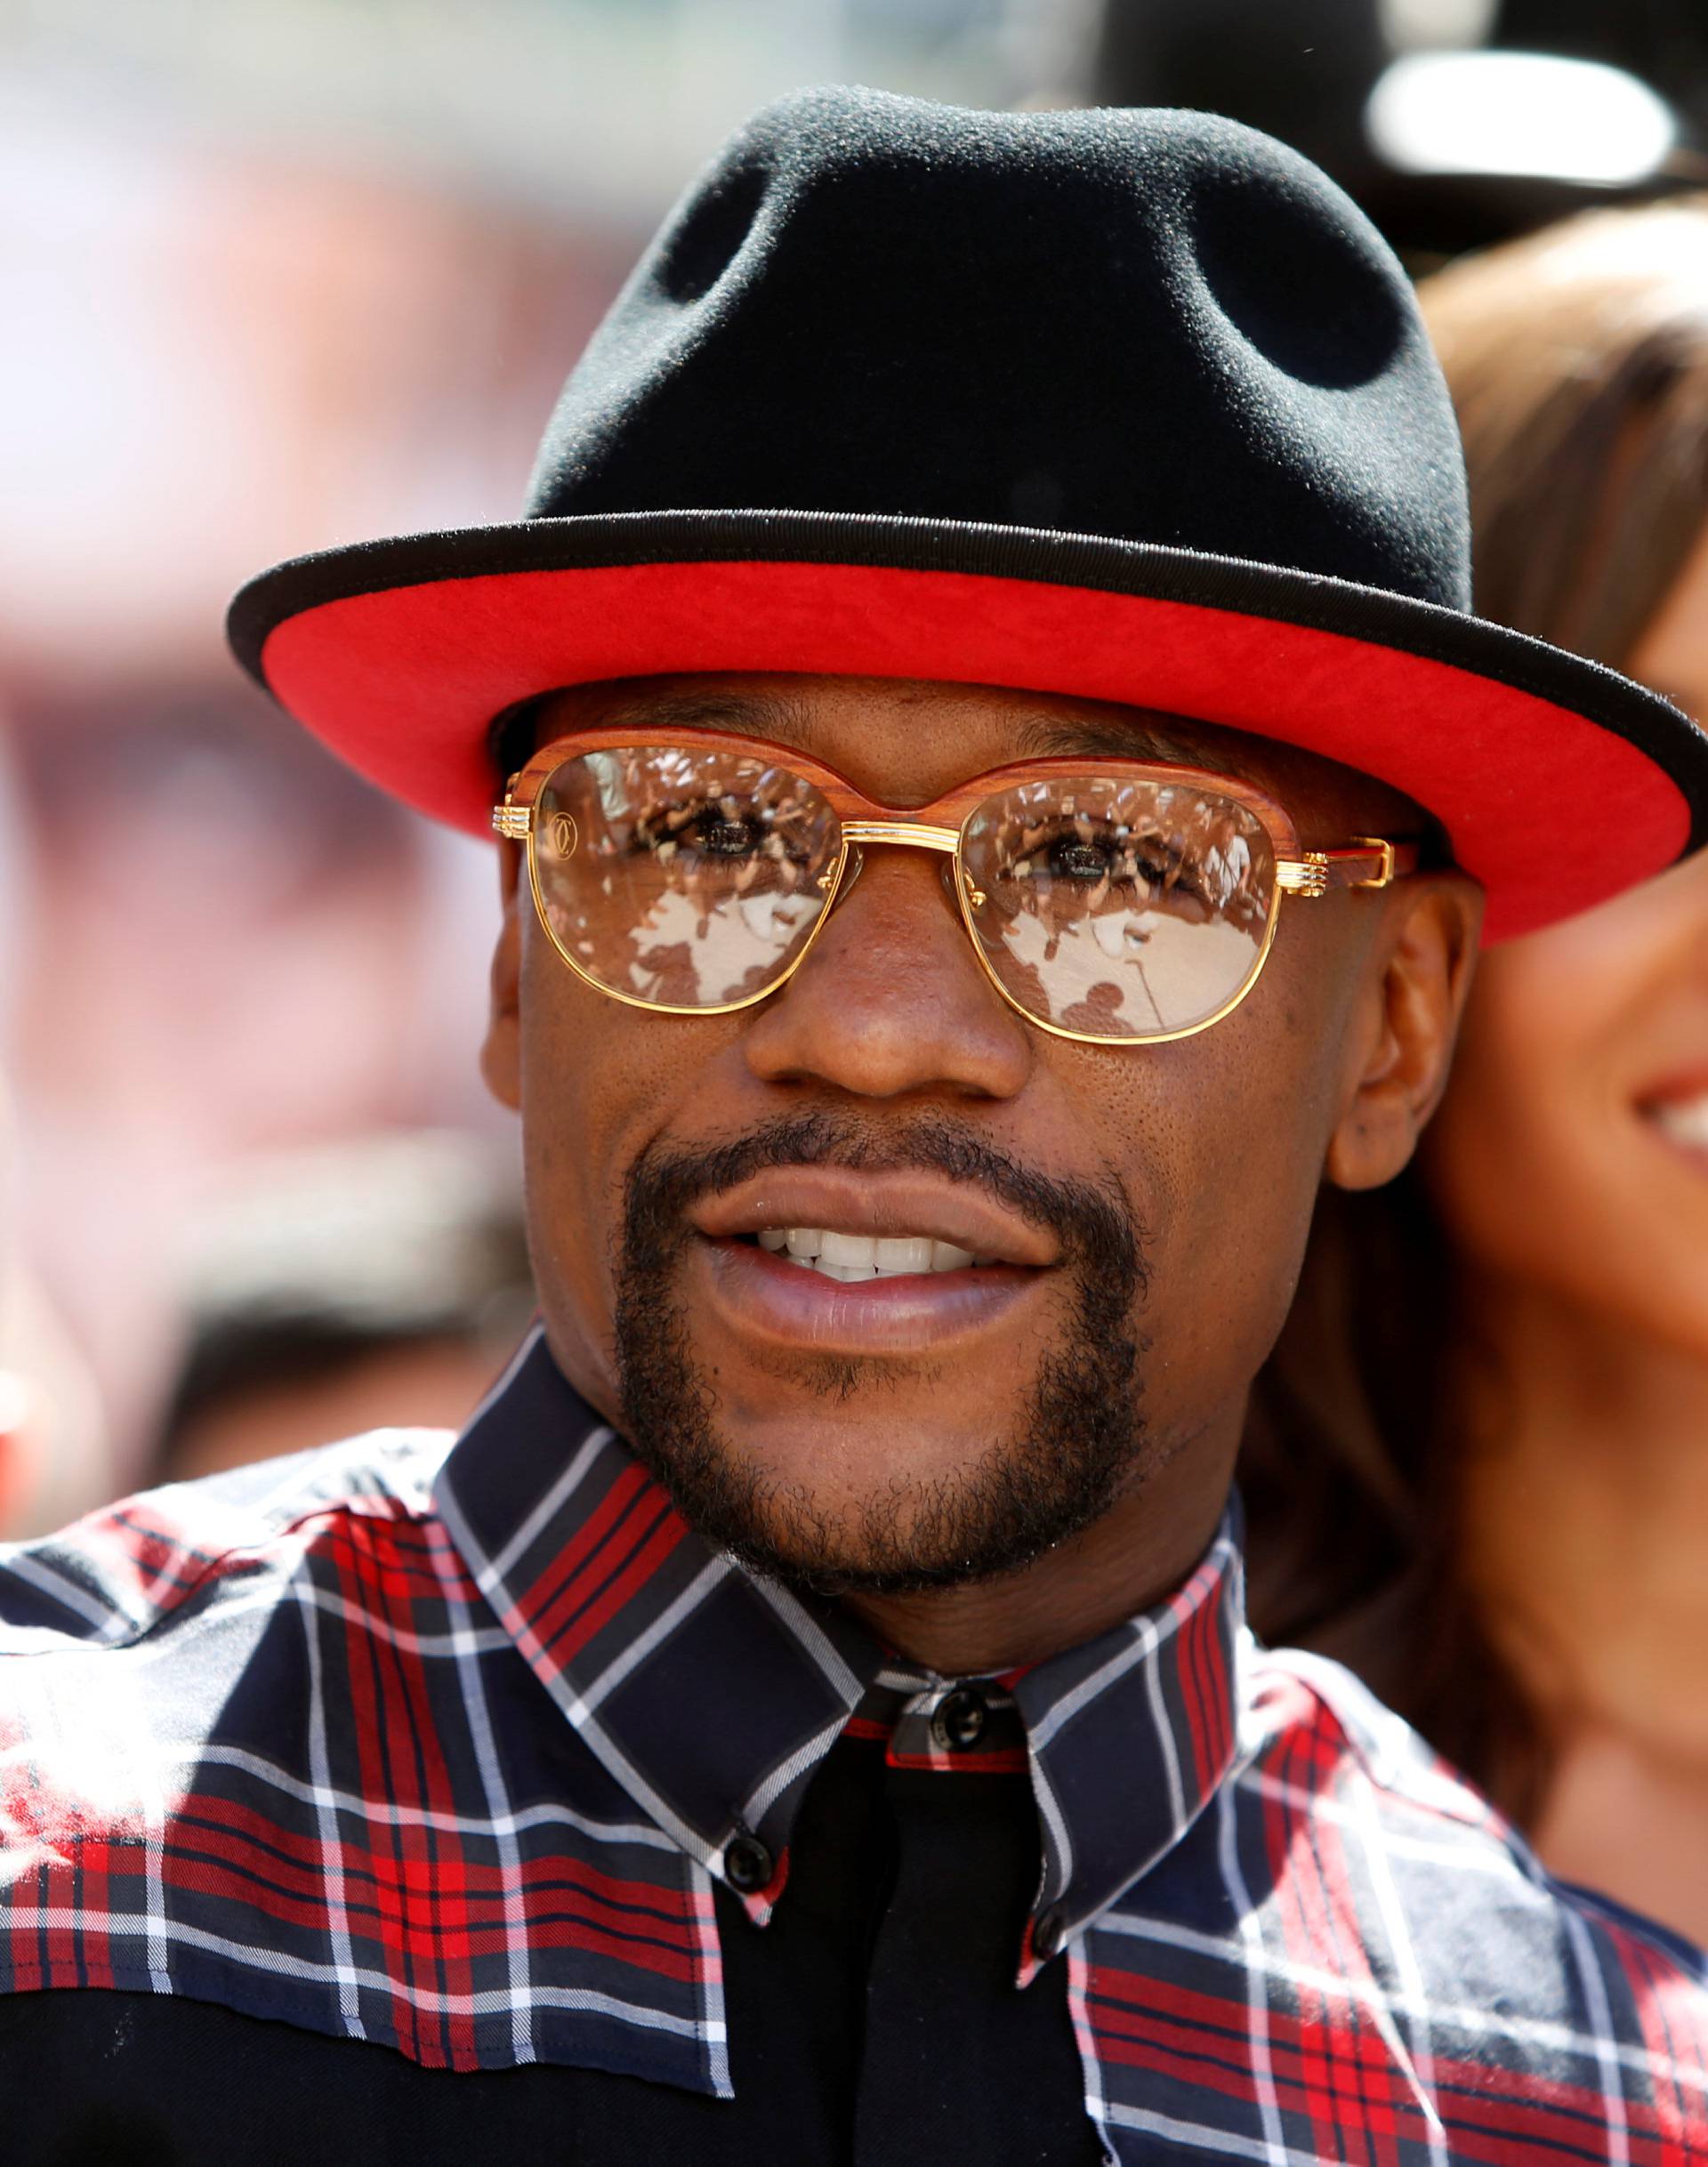 Undefeated boxer Floyd Mayweather Jr. of the U.S. arrives at Toshiba Plaza in Las Vegas